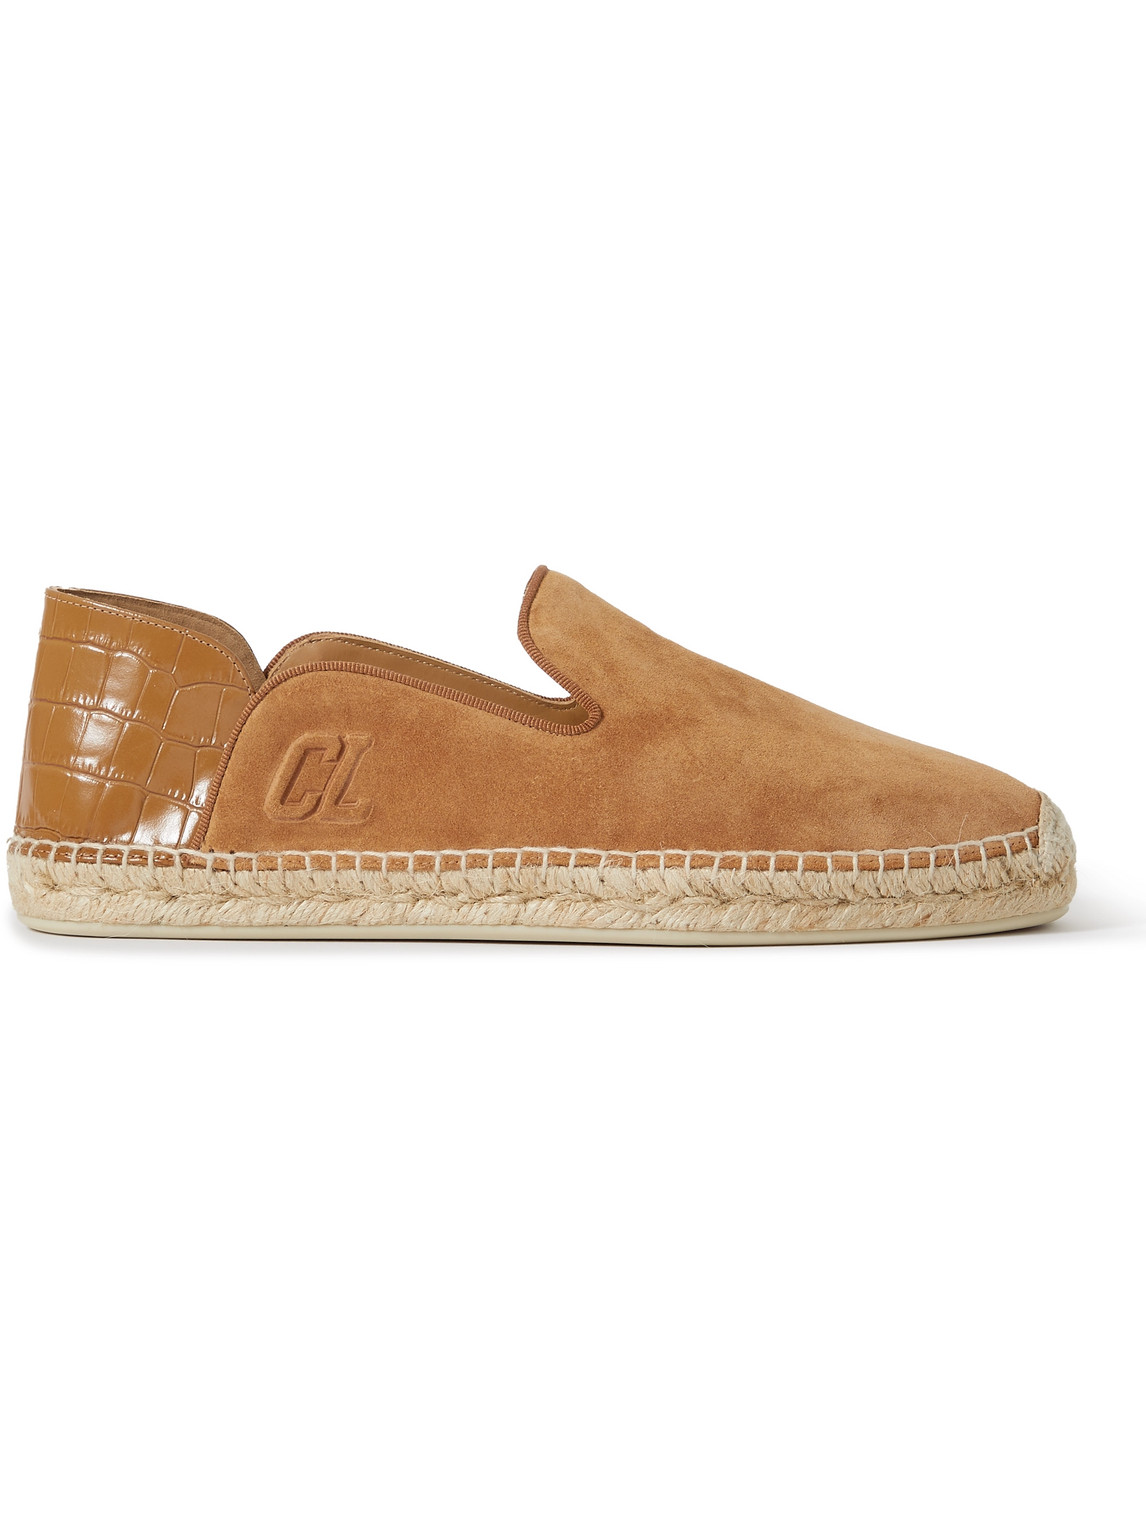 Christian Louboutin Varsi Espadon Grosgrain-trimmed Suede And Croc-effect Leather Espadrilles In Brown